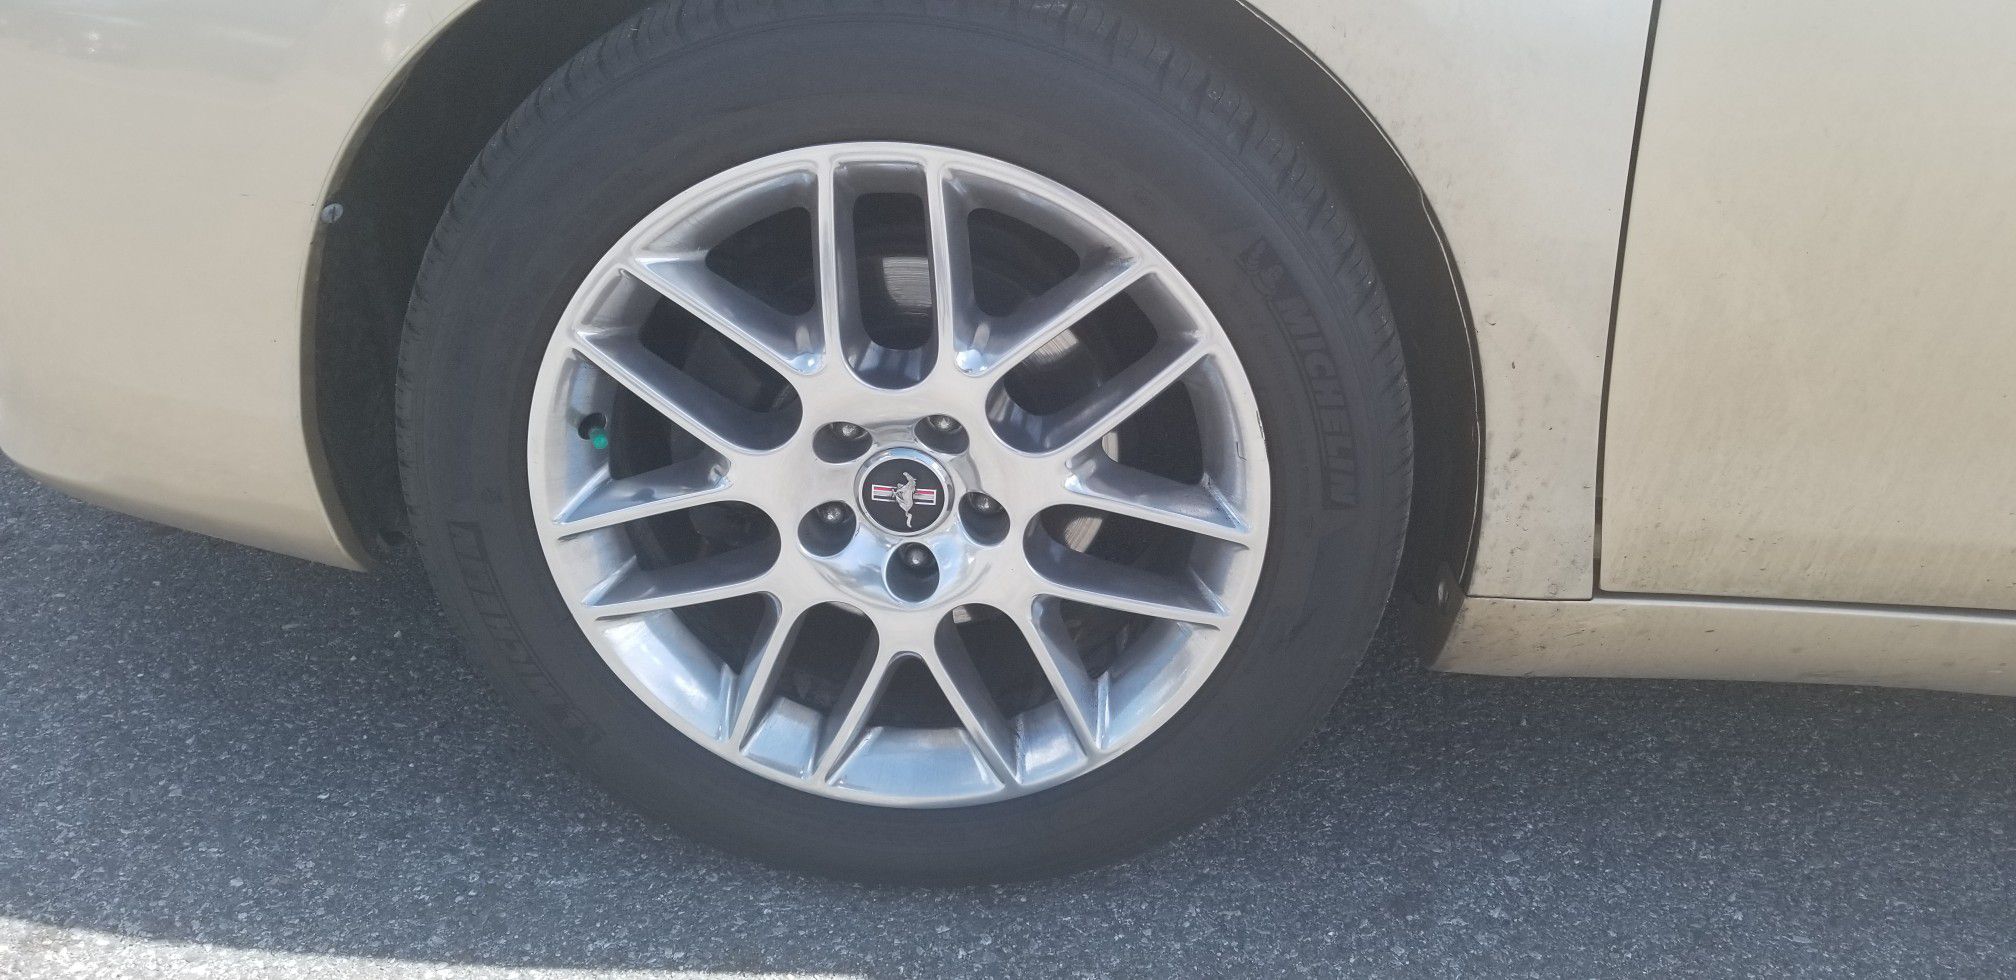 Nice and clean like brand new 4 set of 18" alloy rims with 100% 4 brand new tires